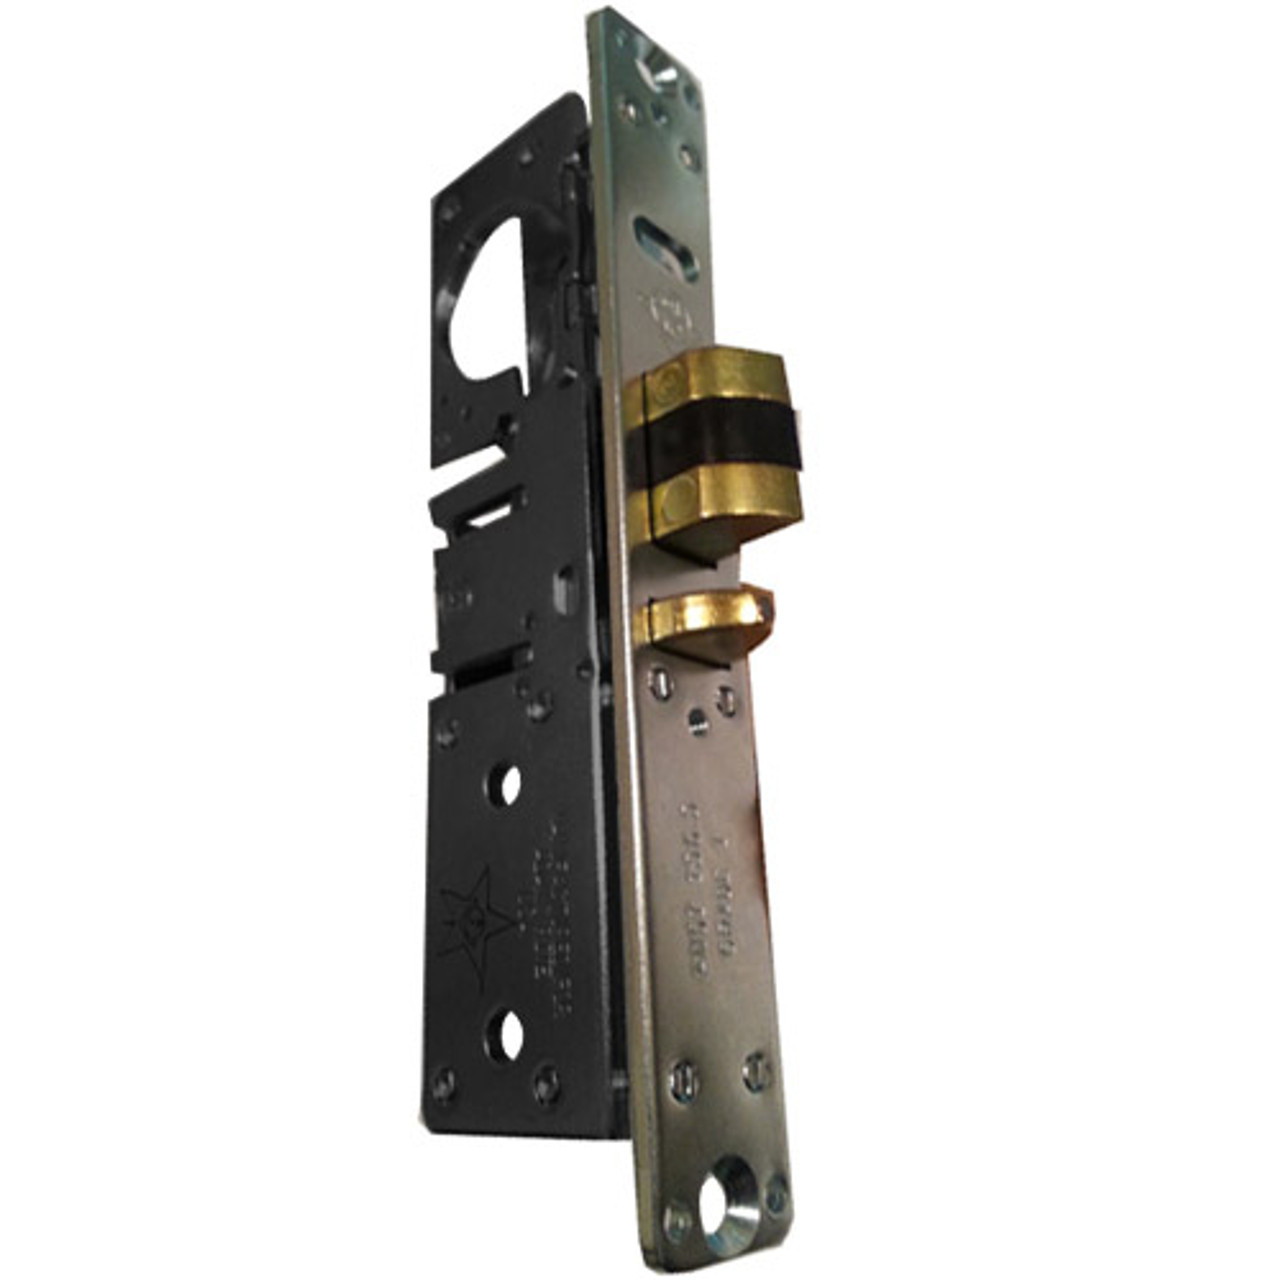 4511W-36-221-335 Adams Rite Standard Deadlatch with Radius Faceplate with weatherstrip in Black Anodized Finish